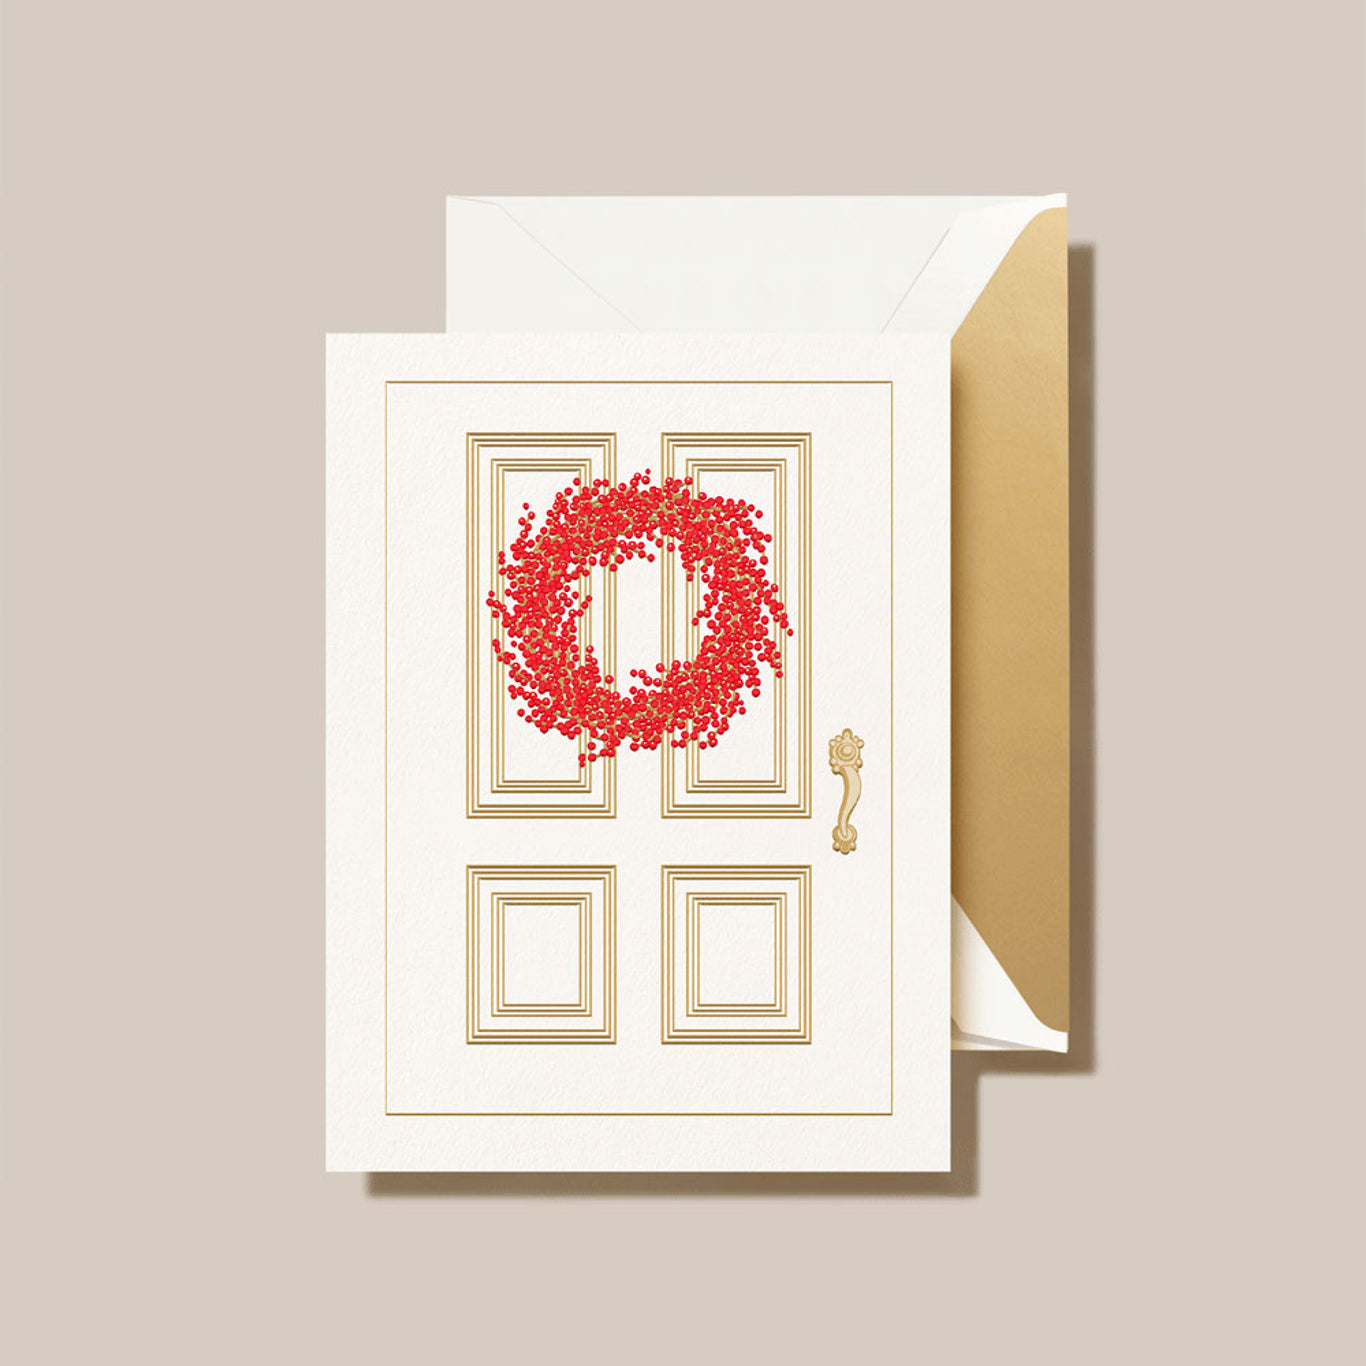 Crane Boxed Holiday Cards - Red Berry Wreath